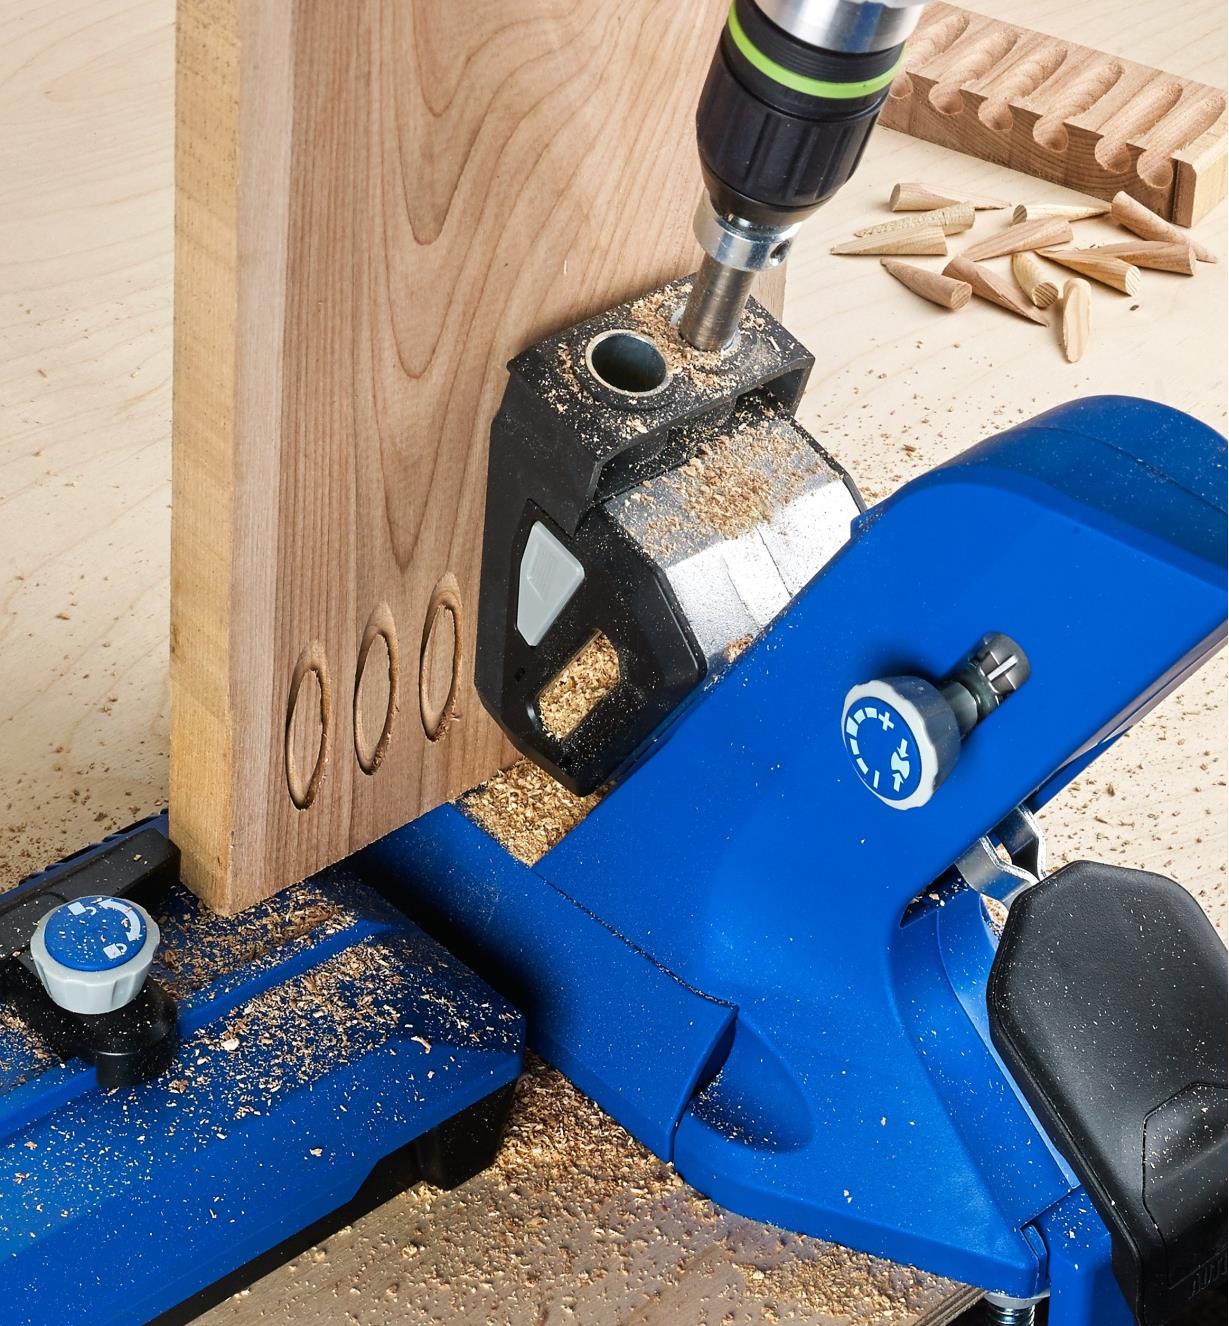 The Kreg 740 kit used with the 720 Pro jig to cut wooden plugs to conceal pocket holes